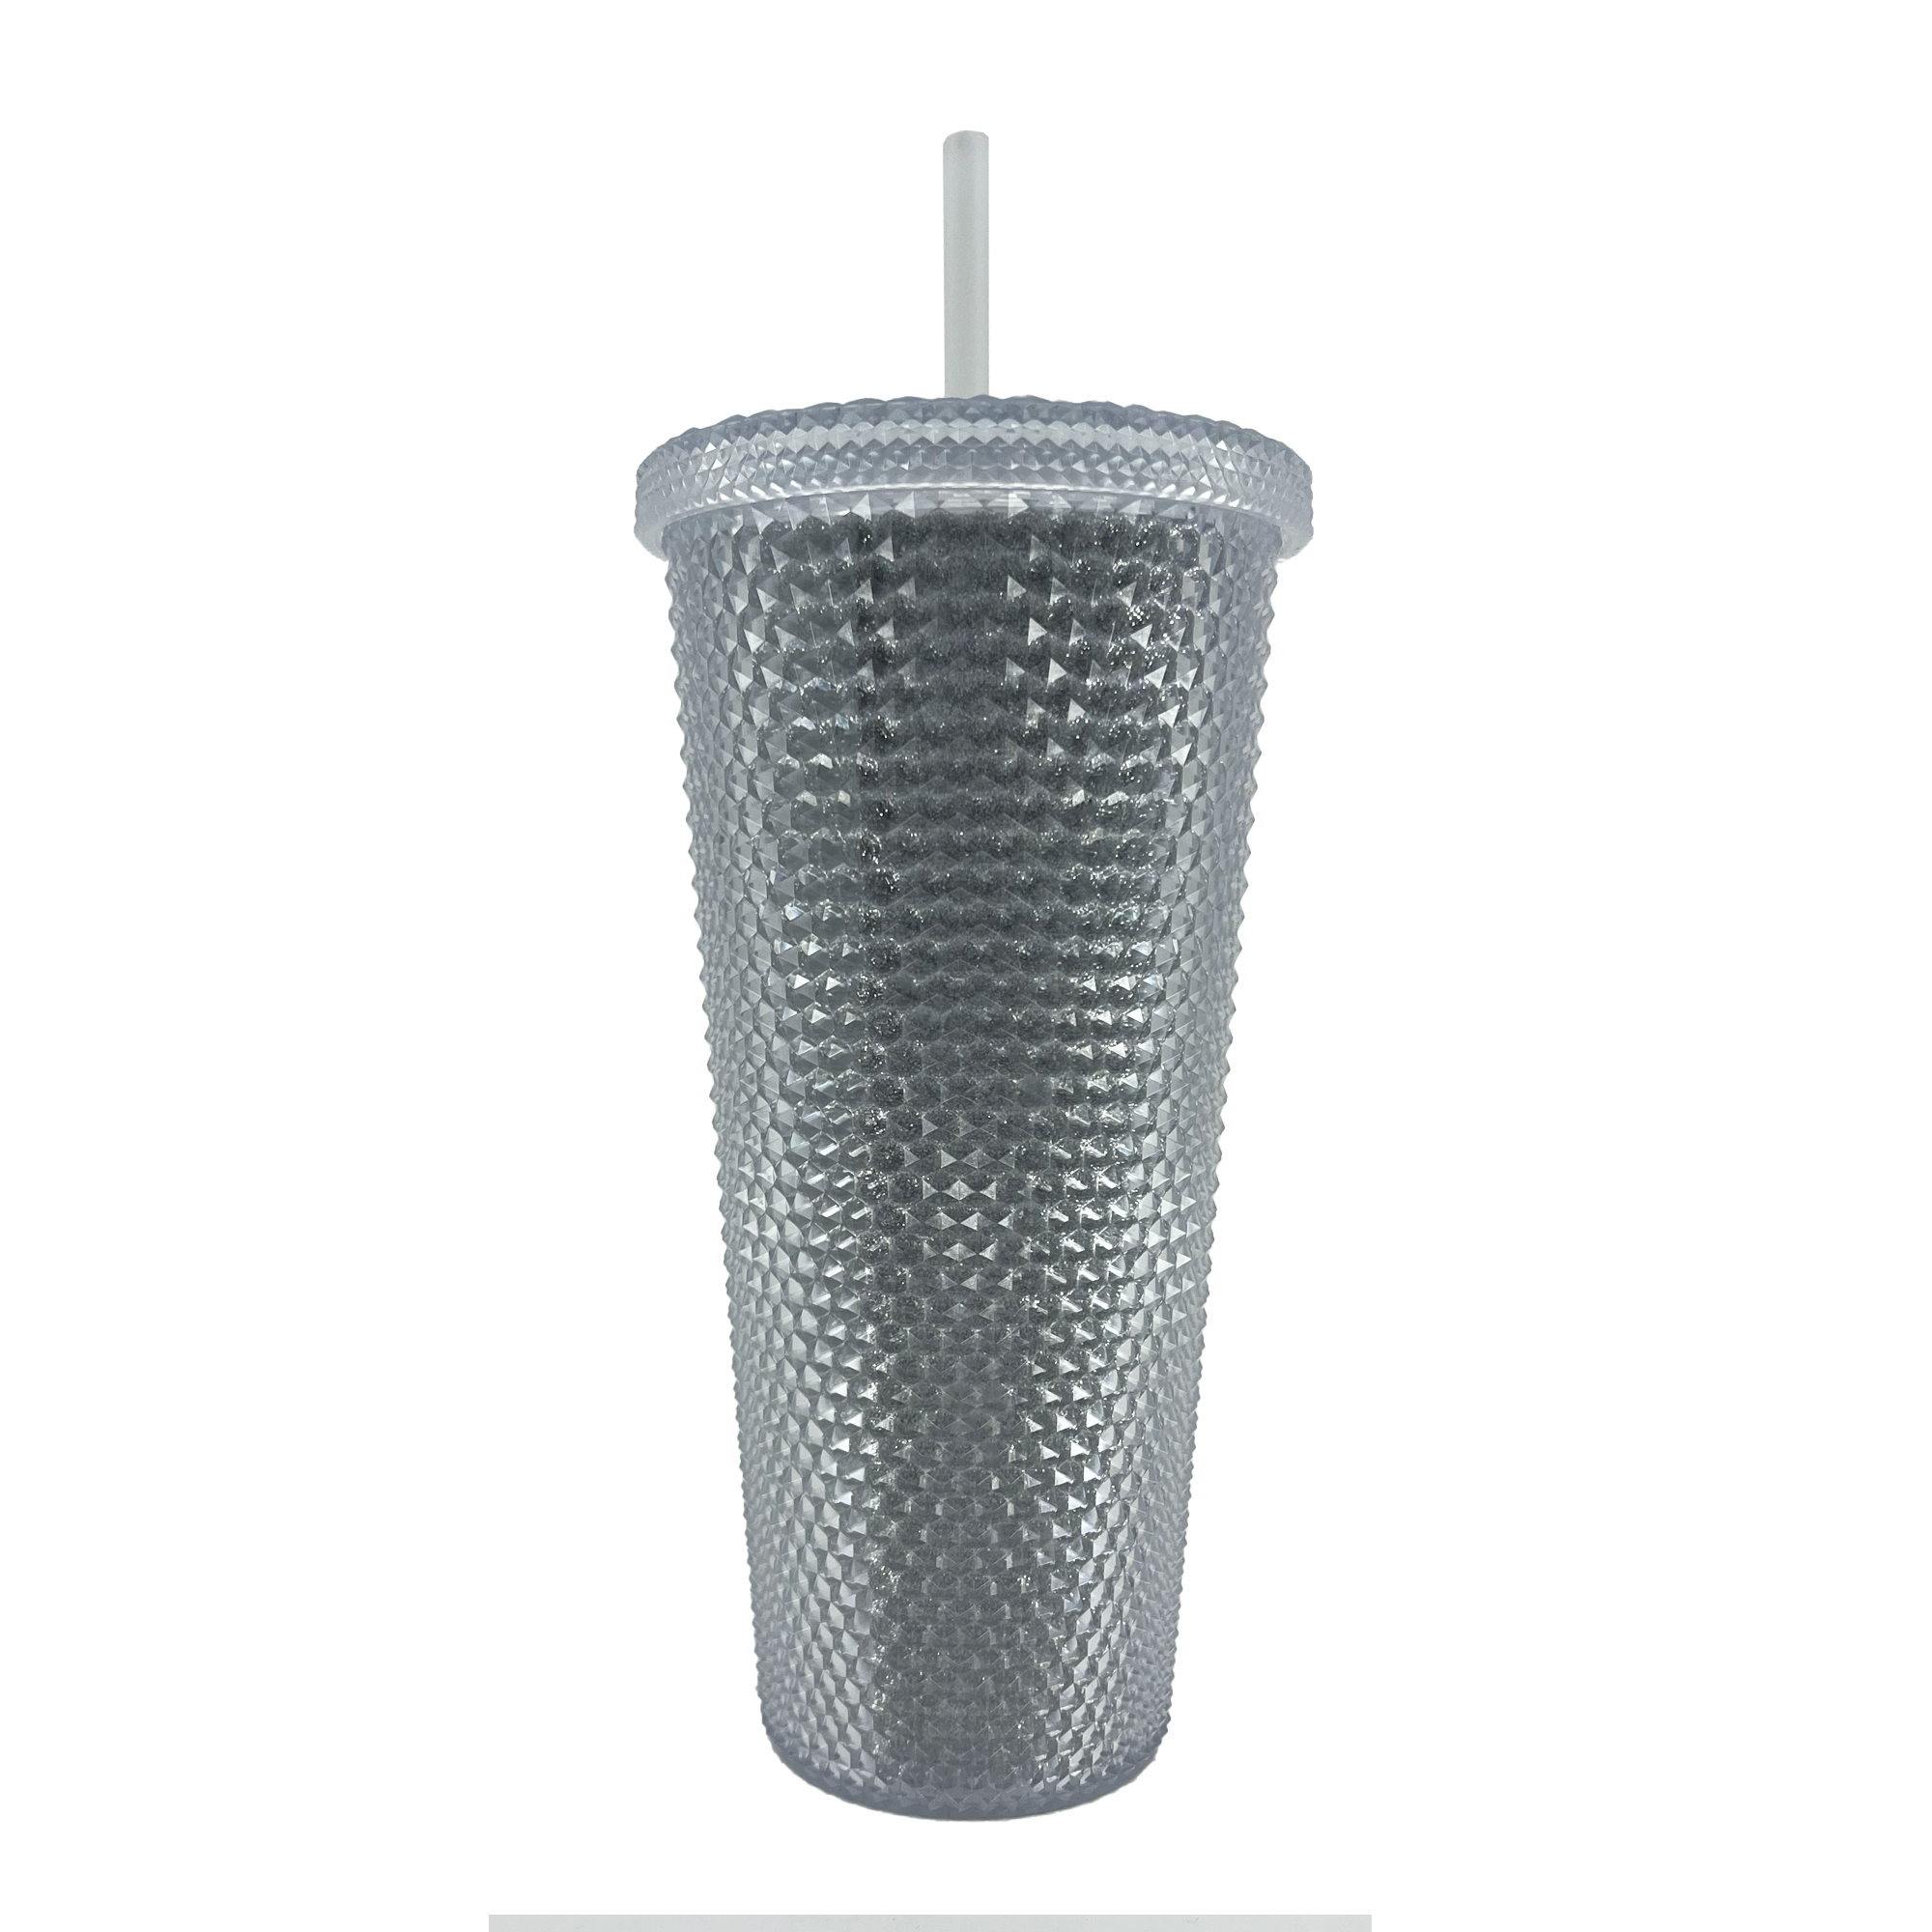 The backside of a silver-studded Oaklandish bling travel tumbler with lid and straw.